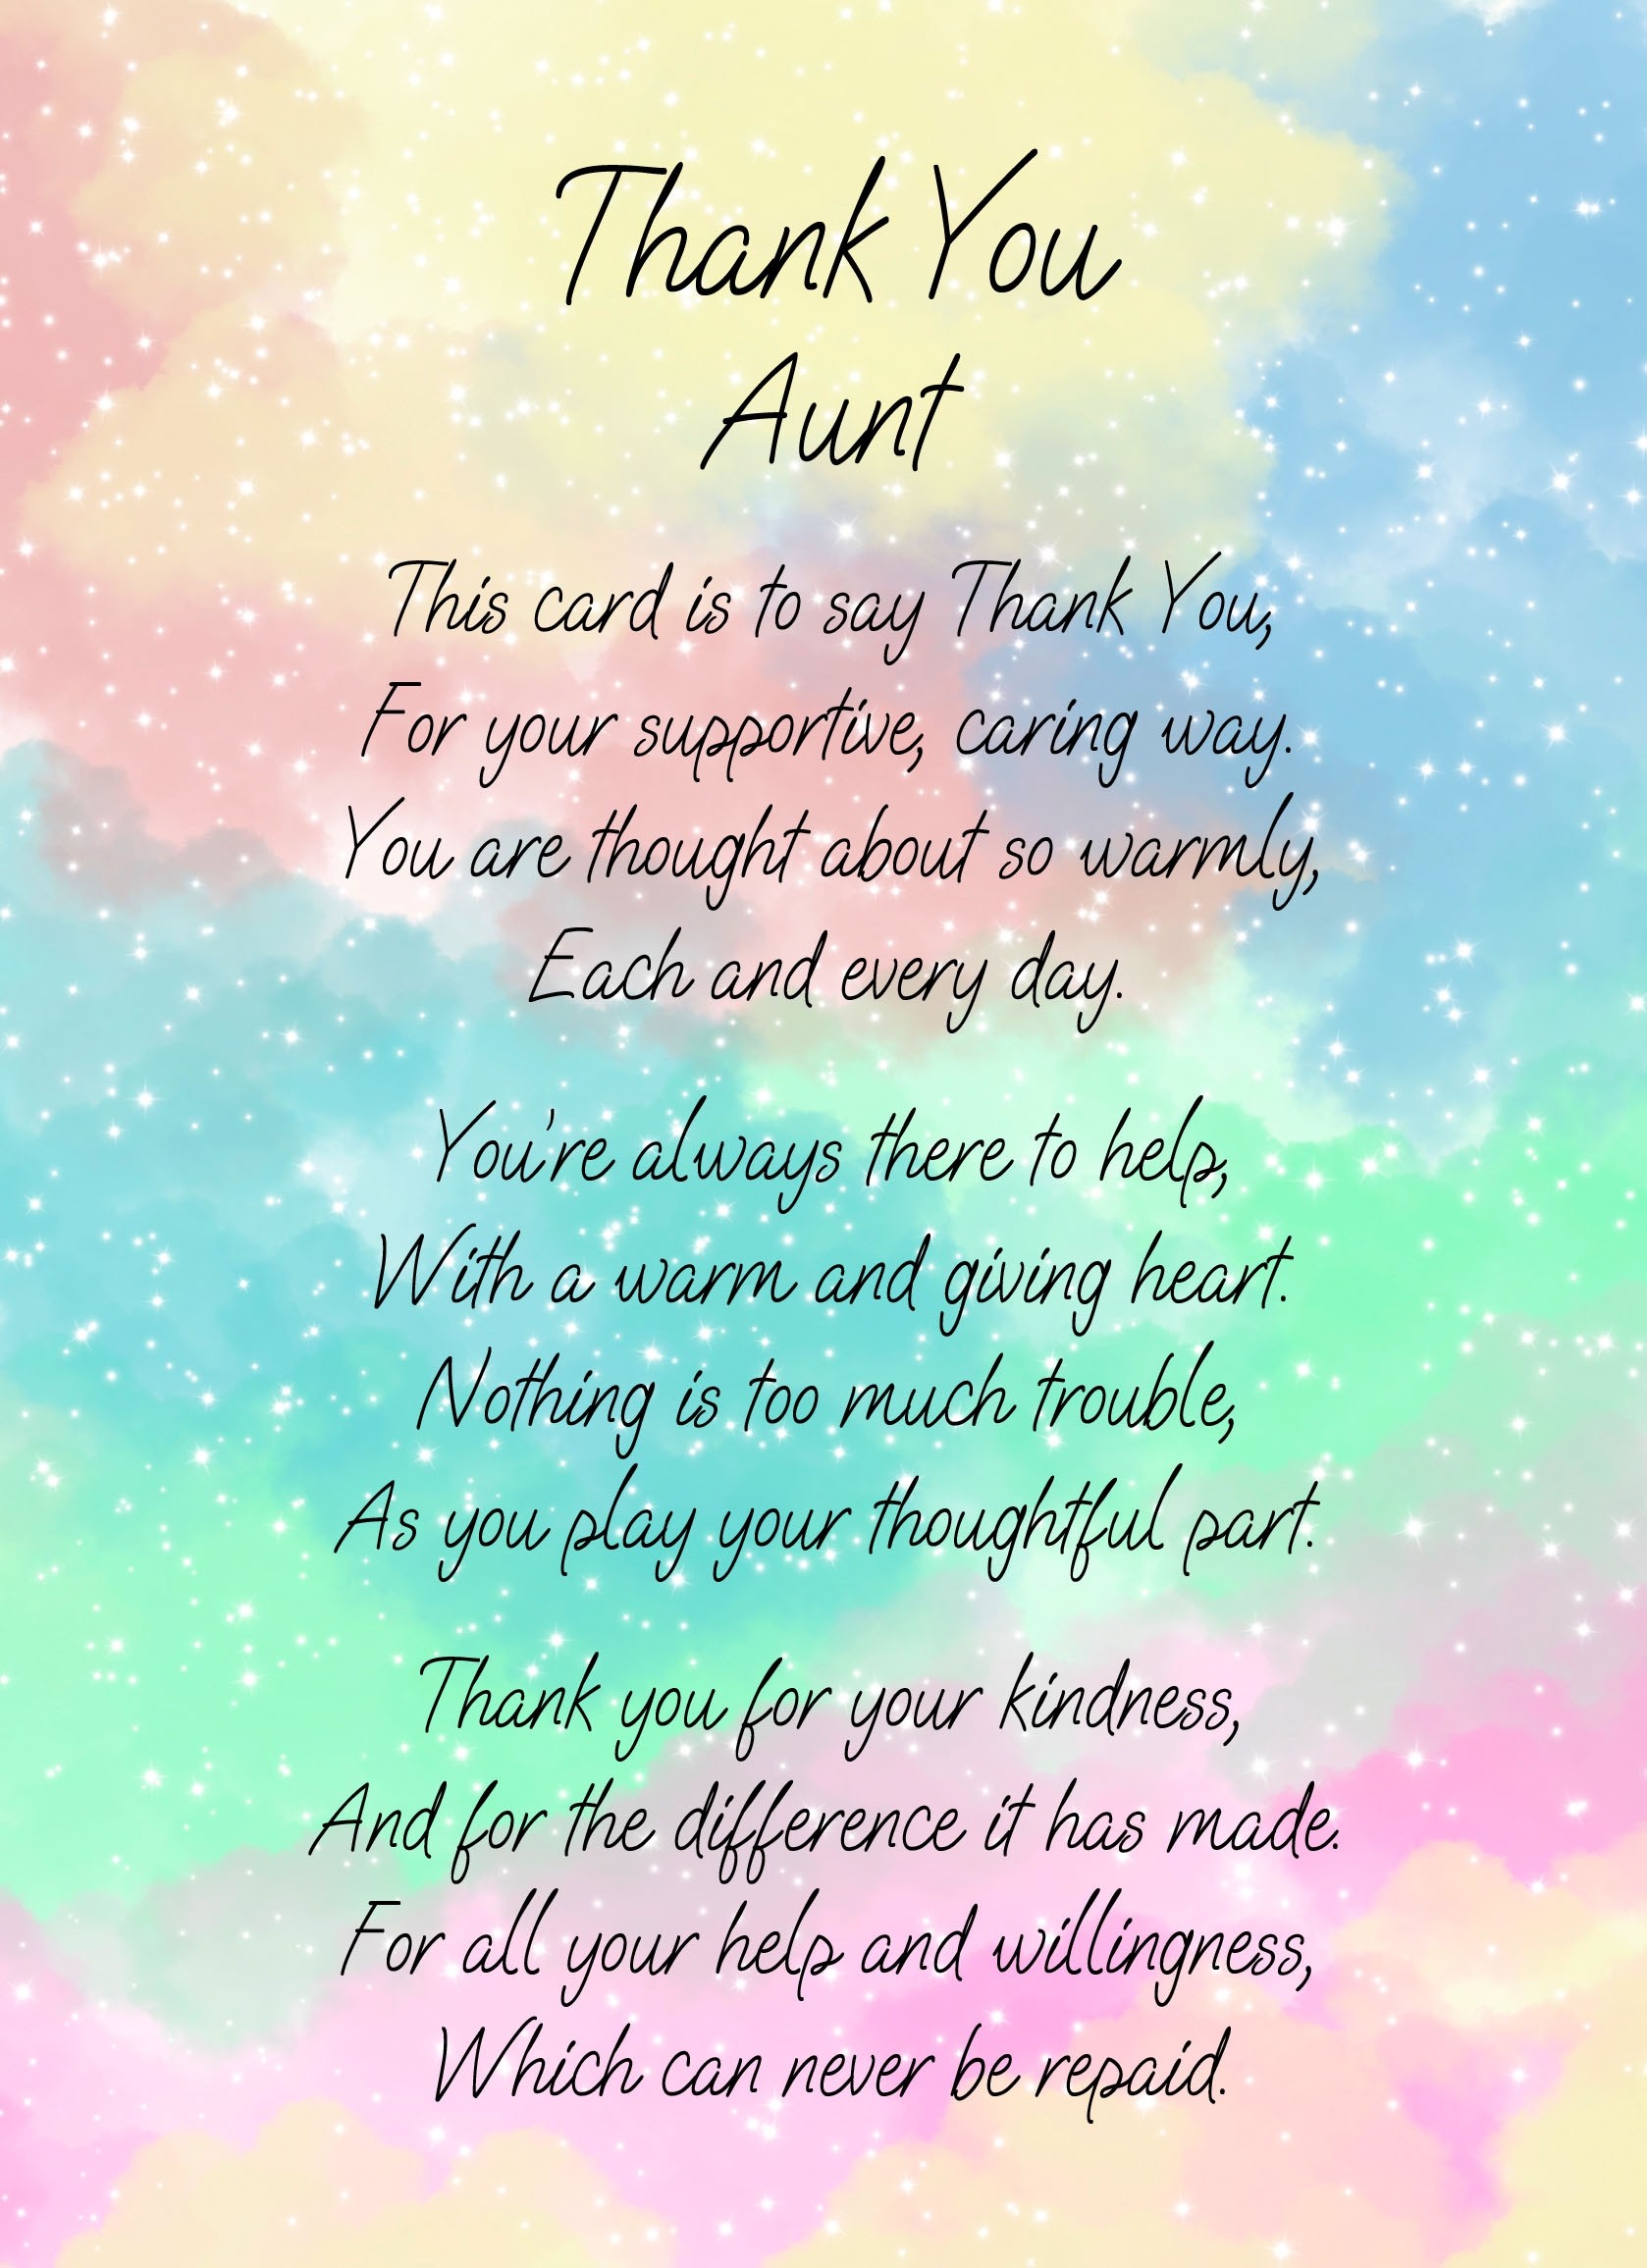 Thank You Poem Verse Card For Aunt